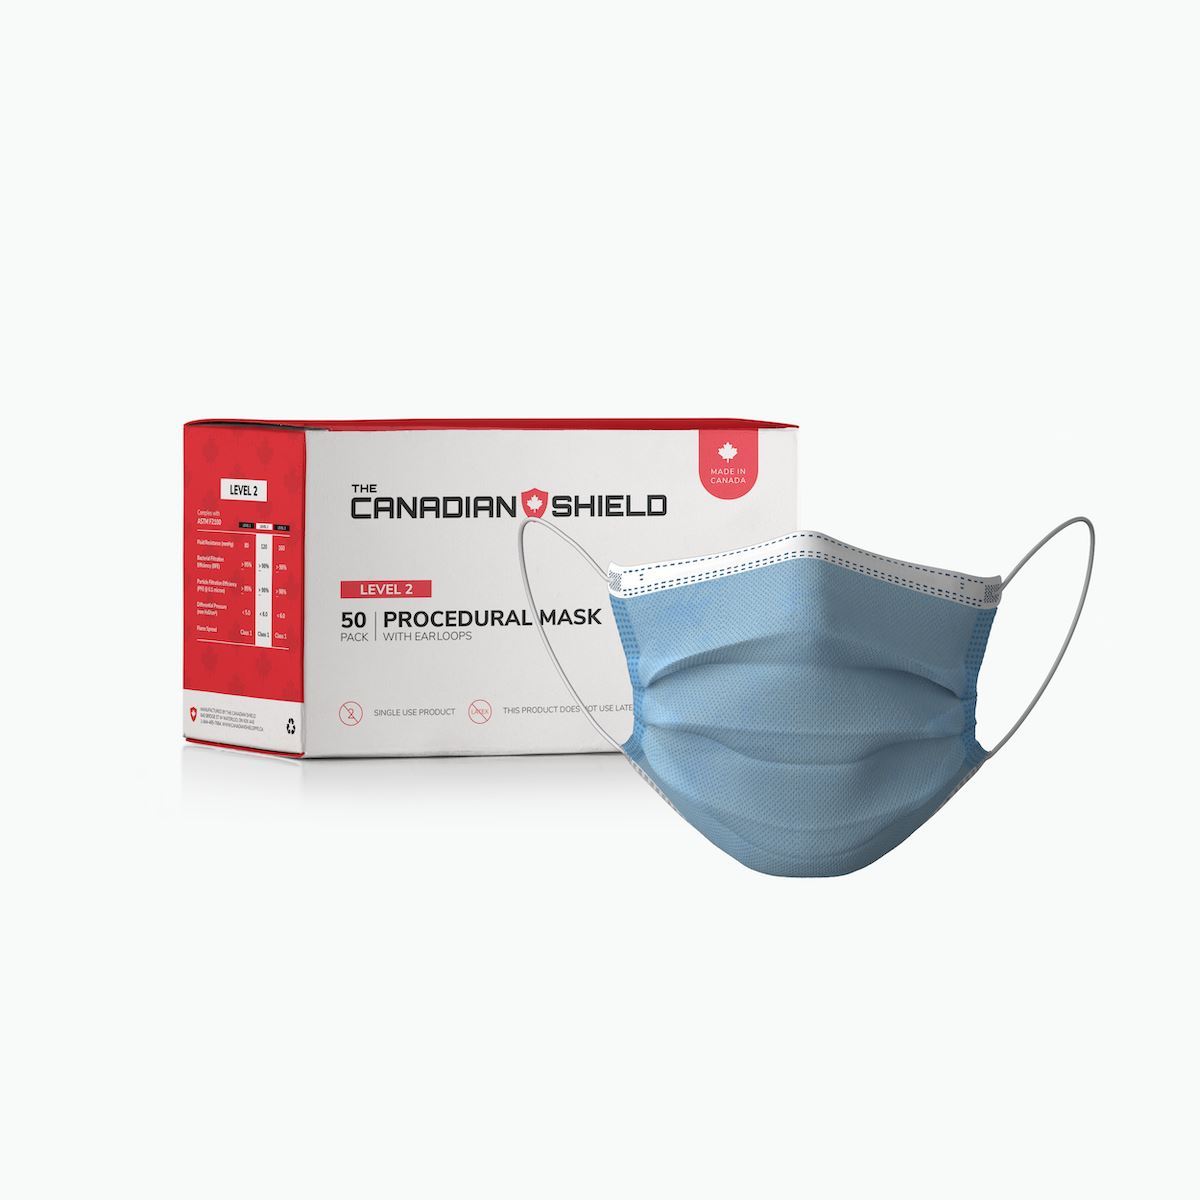 The Canadian Shield medical-grade ASTM Level 2 Procedural Surgical Face Mask